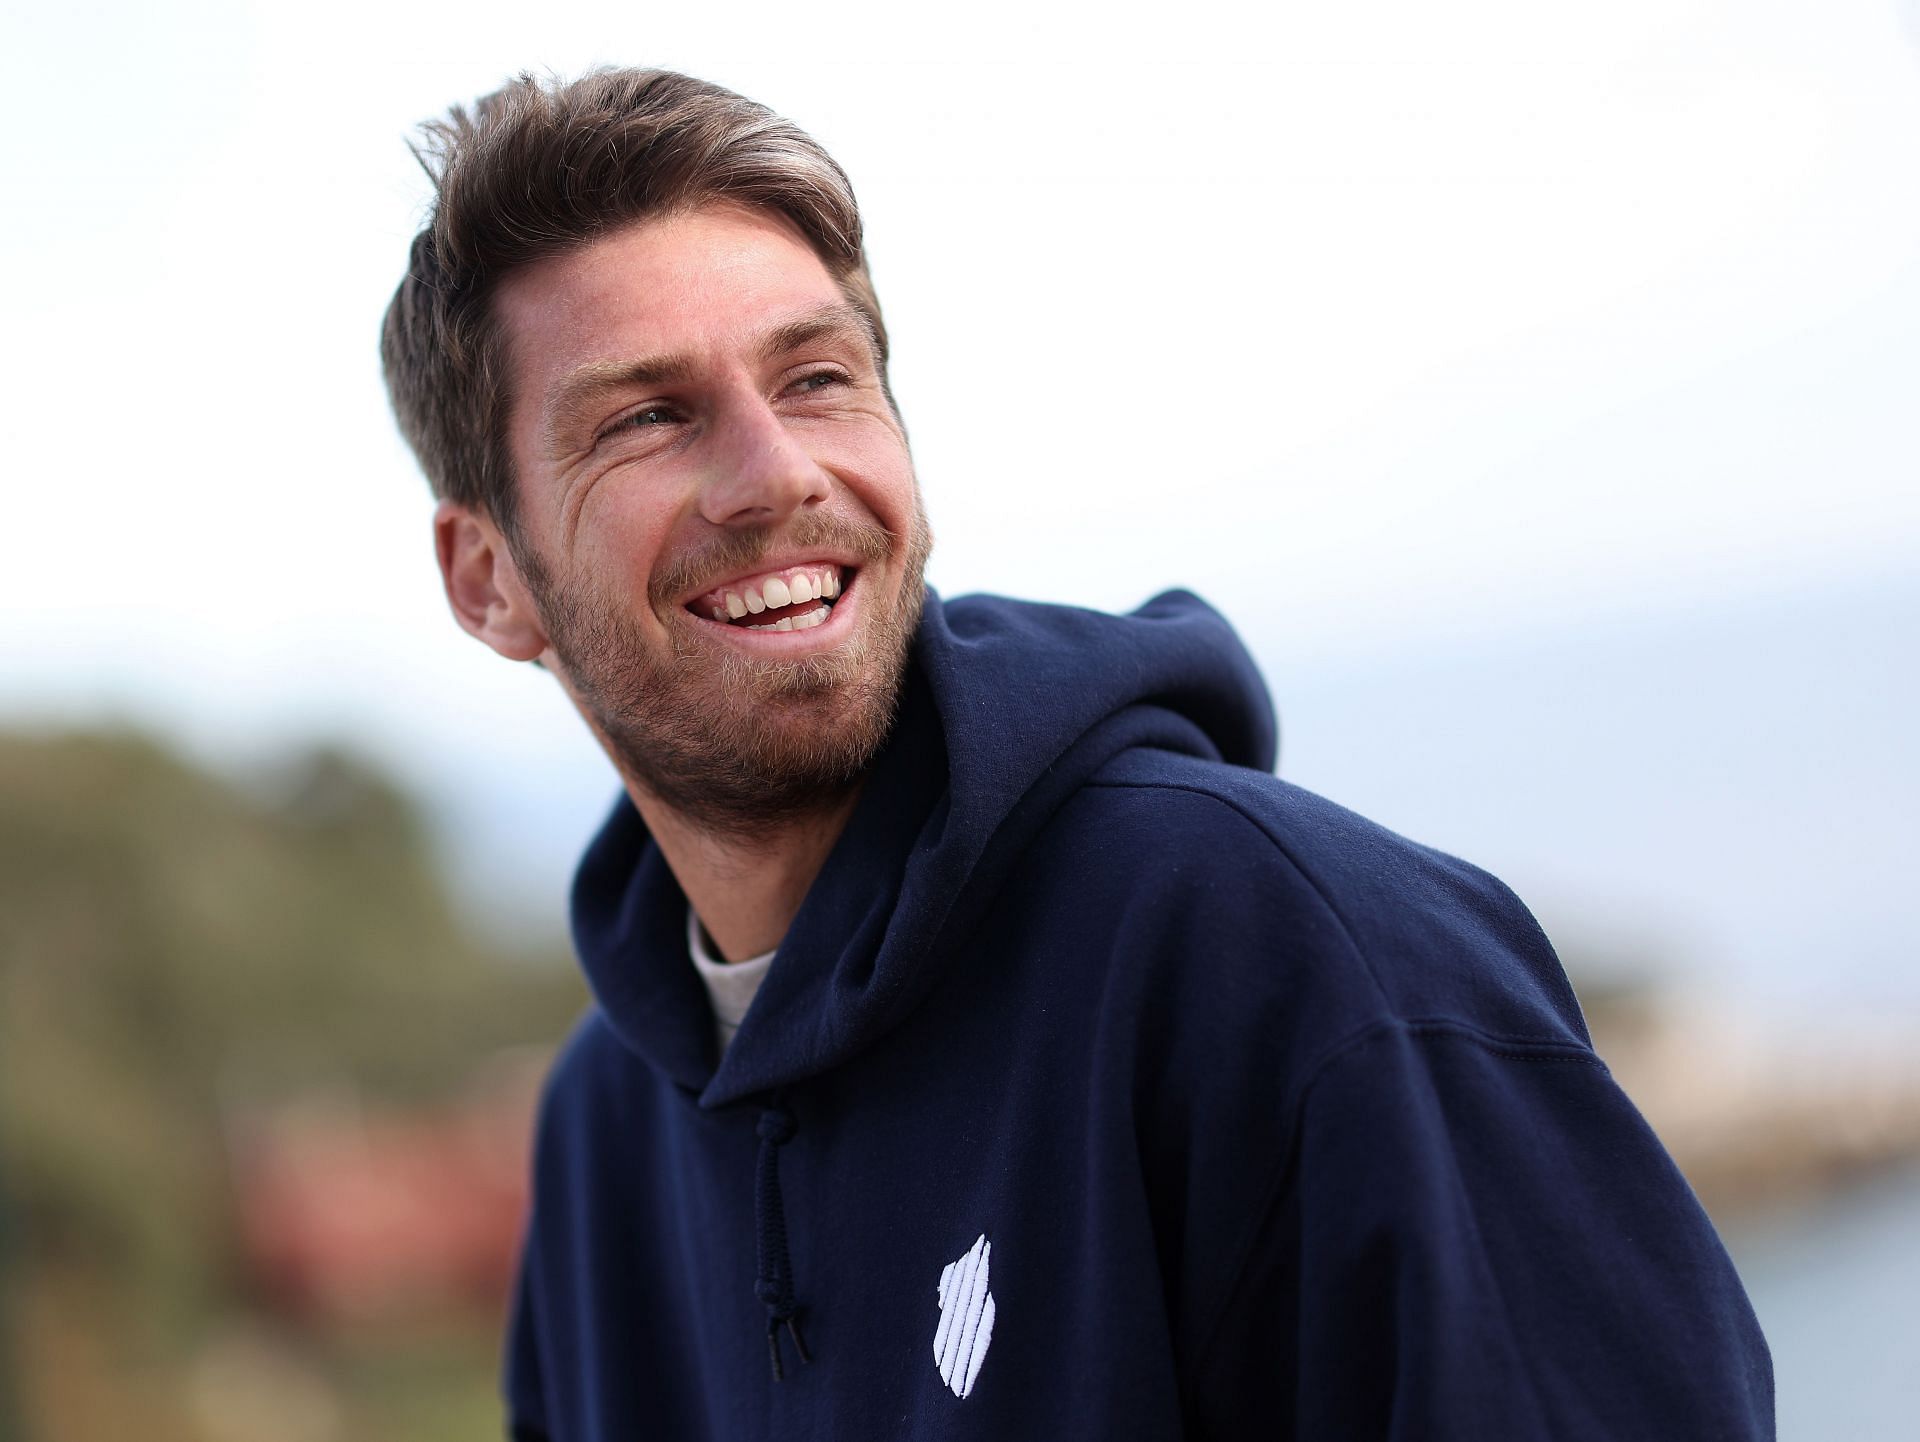 Cameron Norrie at the 2022 Rolex Monte-Carlo Masters.